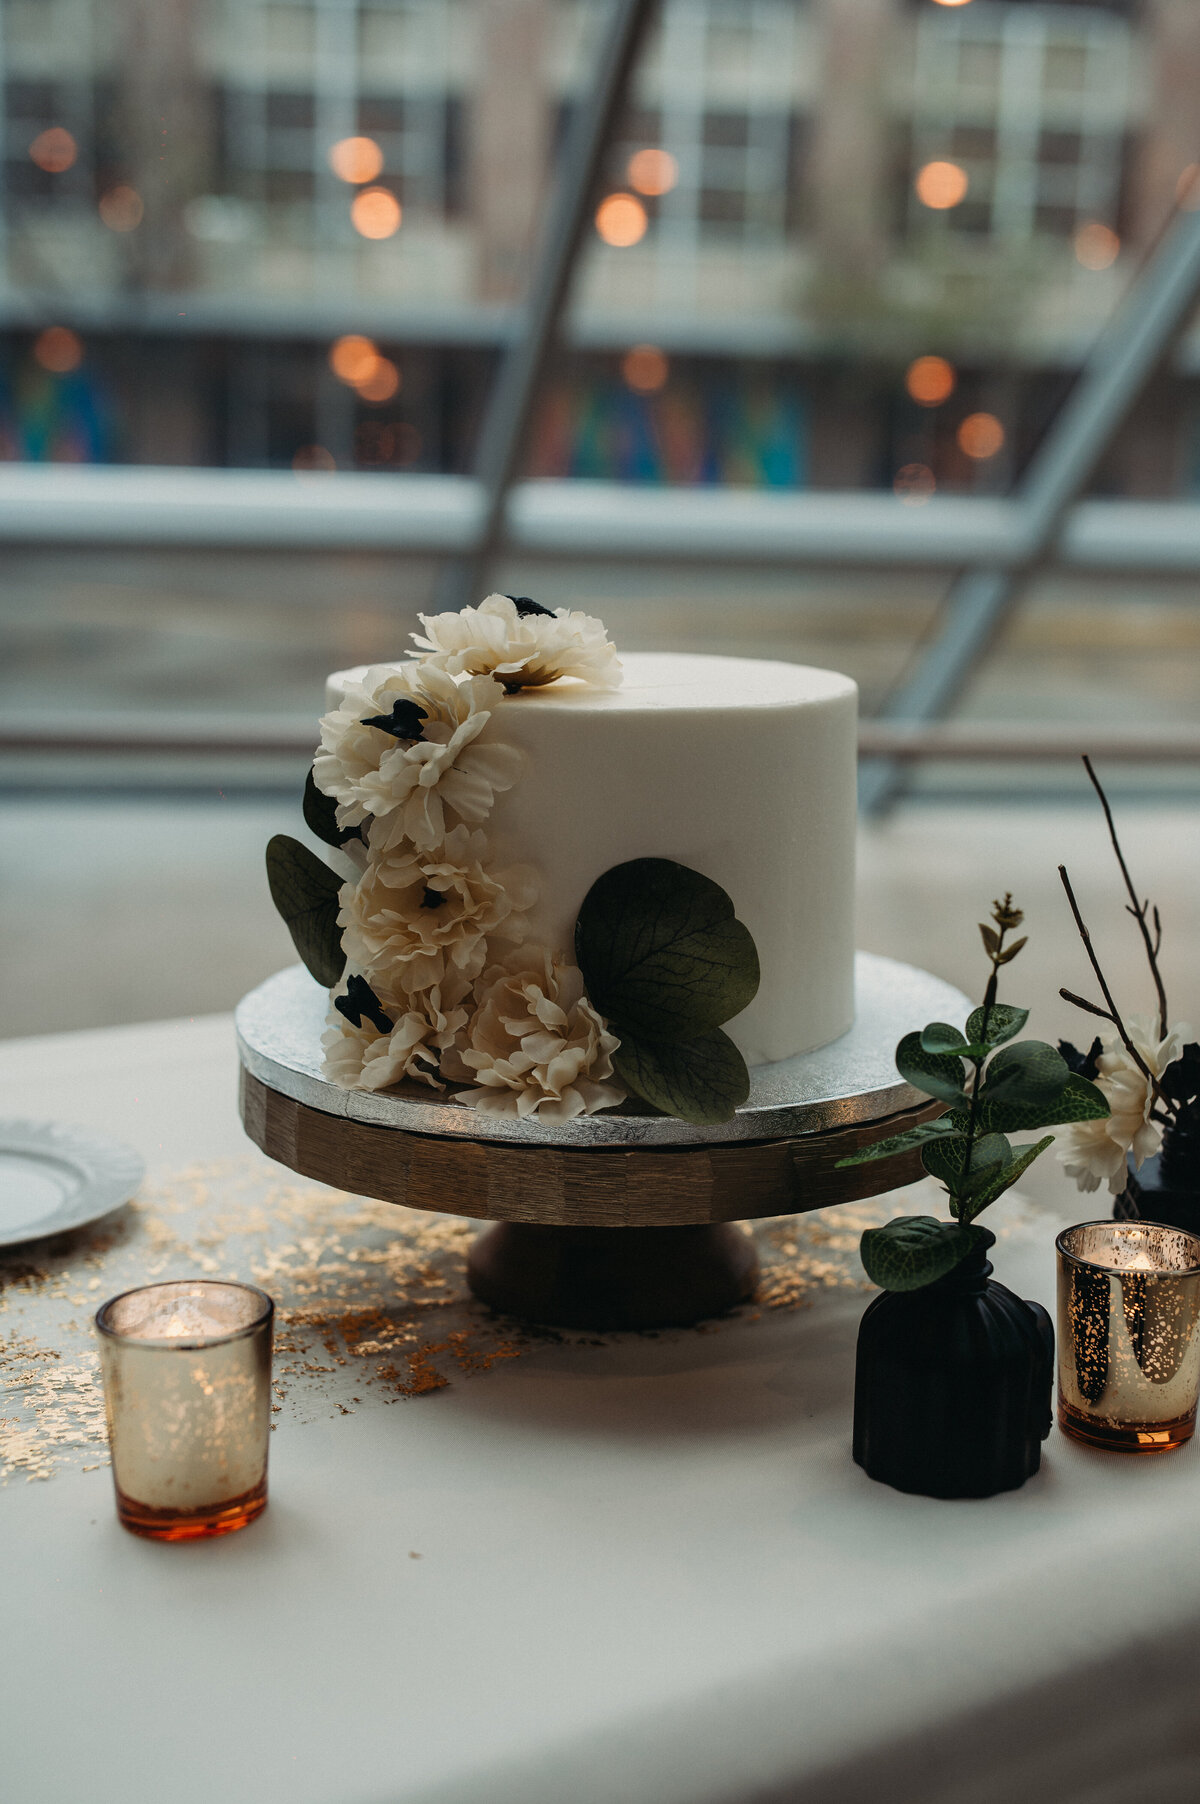 Small black crows hide in white flowers on this minamilistic wedding cake,